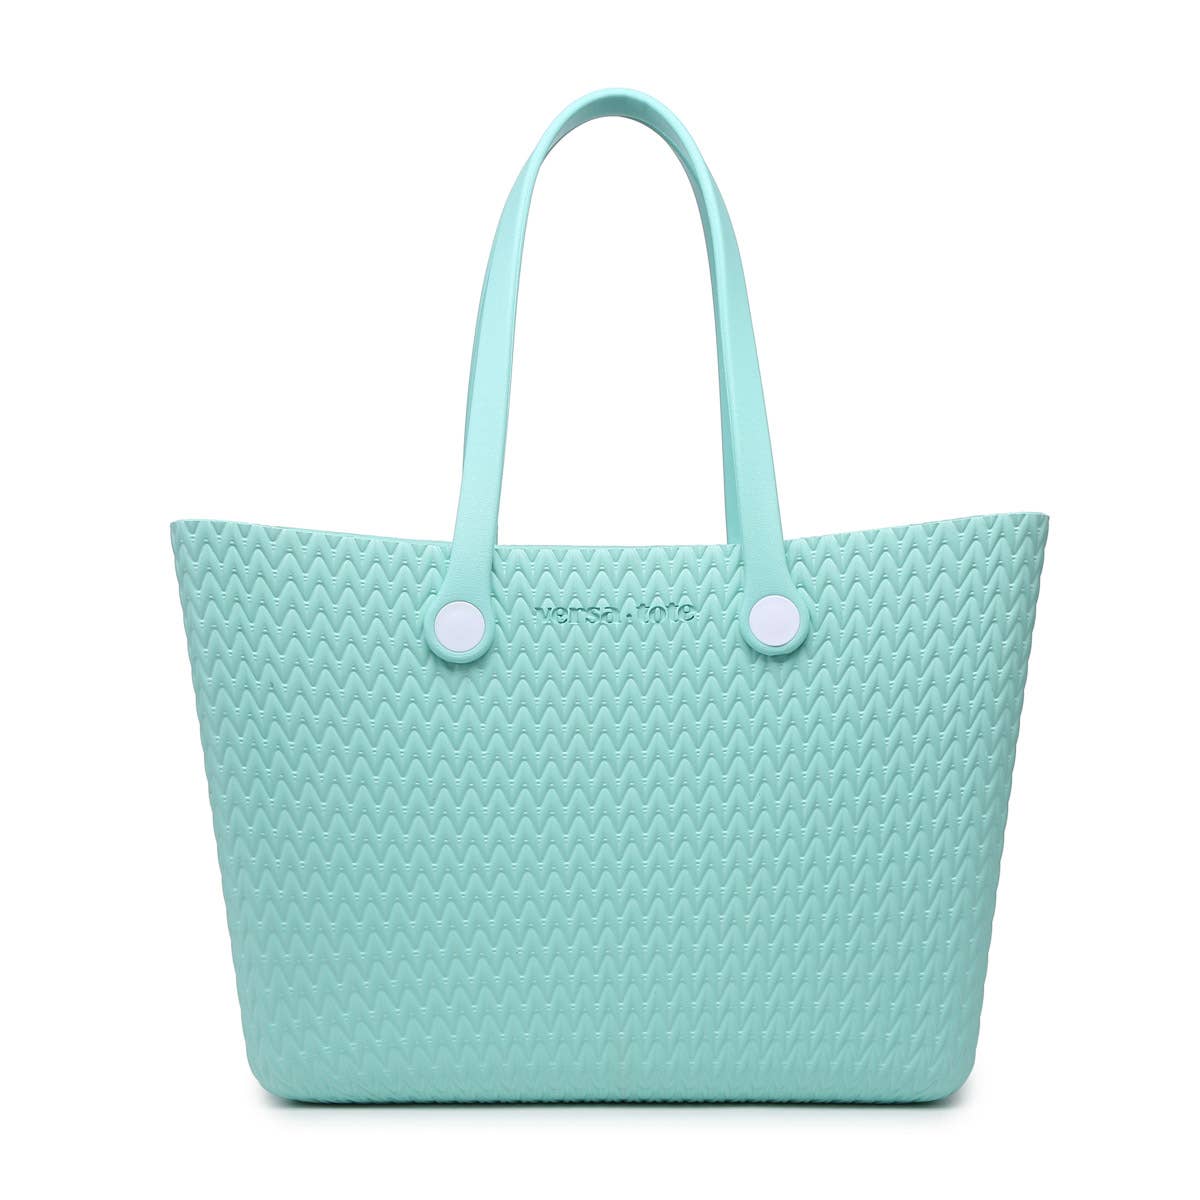 Carrie All Textured Versa Tote - Mint and Brown Braided Leather